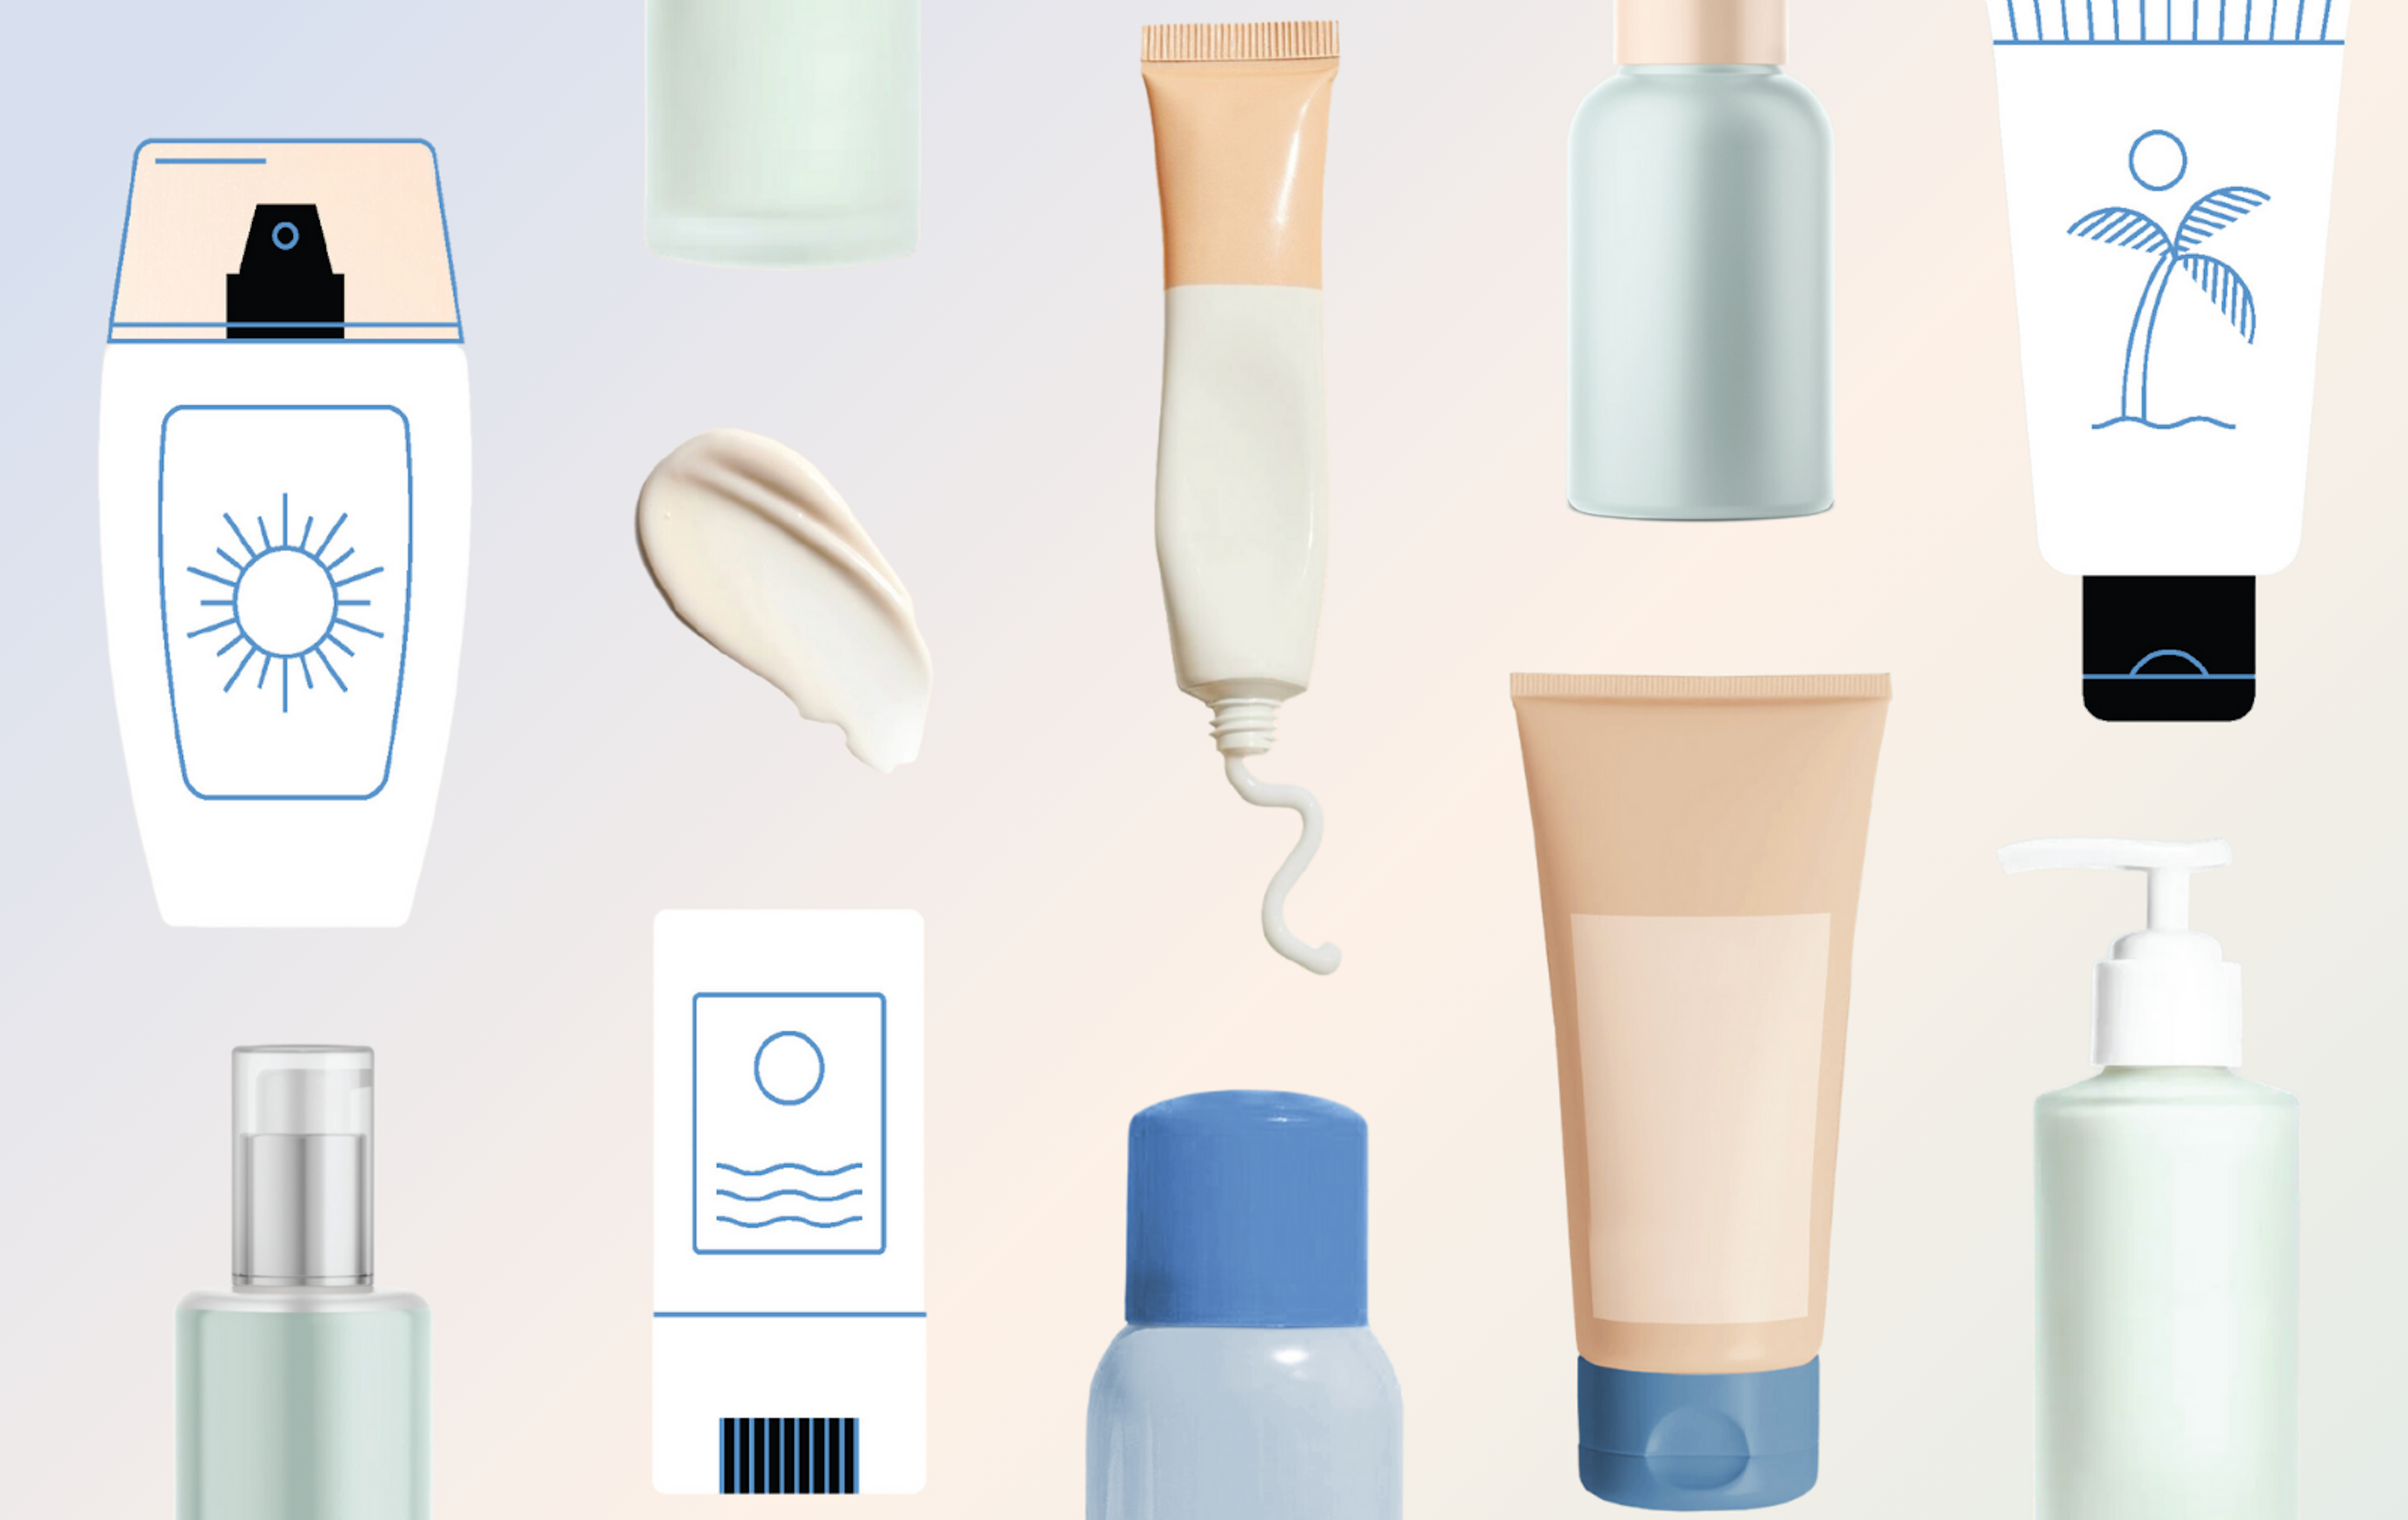 Mixture of photos and illustrations of sunscreens in various formats